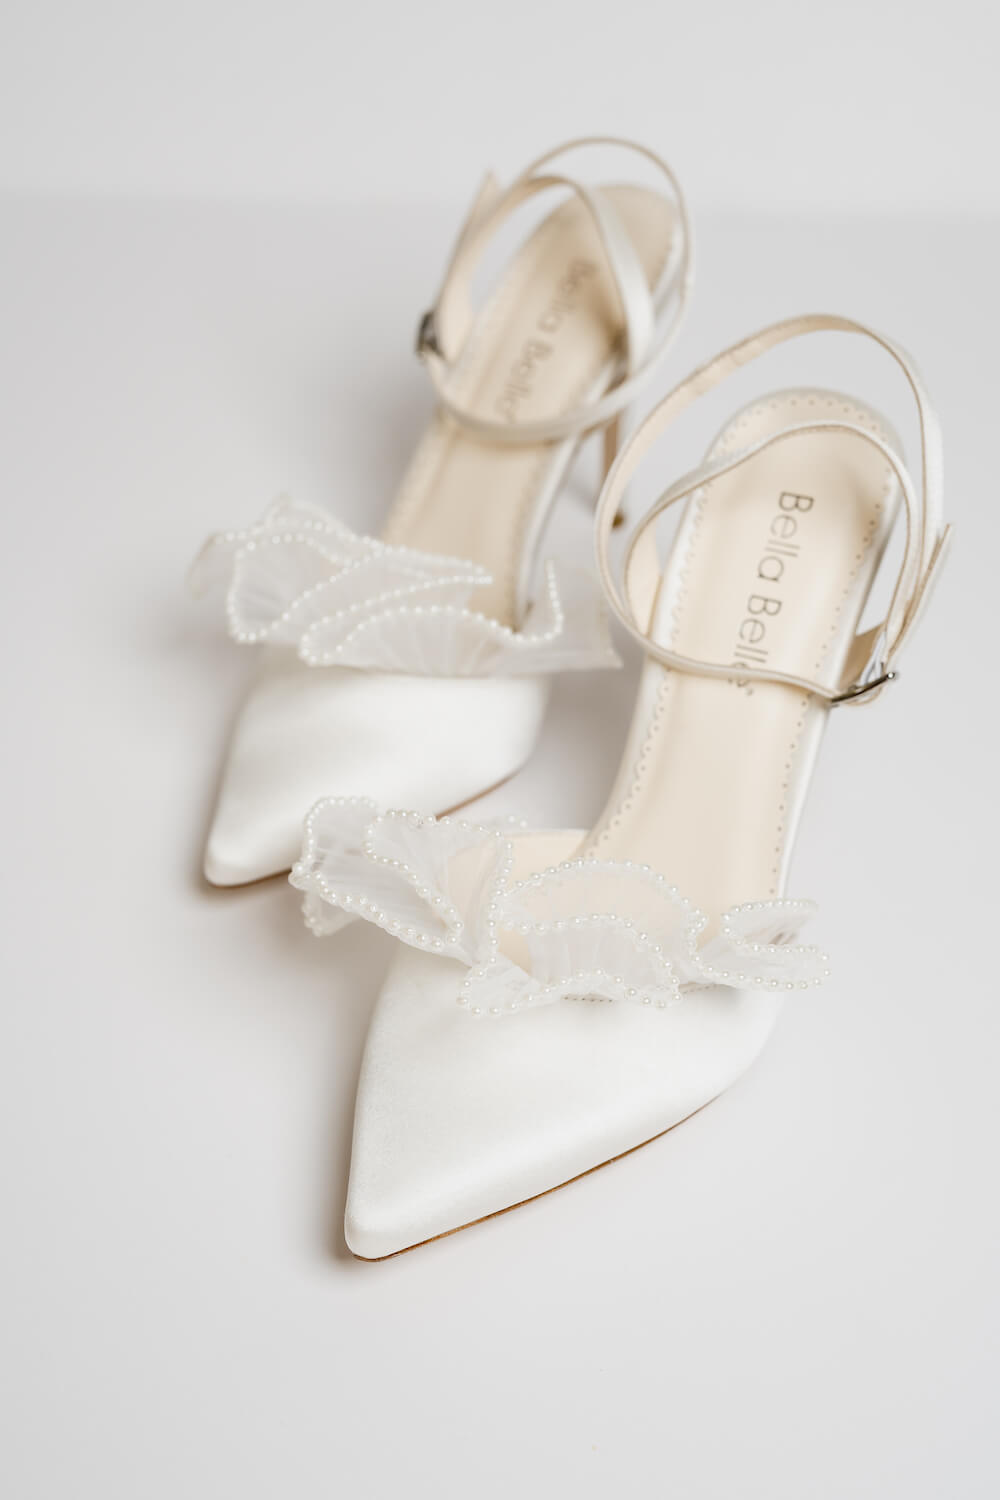 Our predictions for next years top bridal shoe trends! What do you